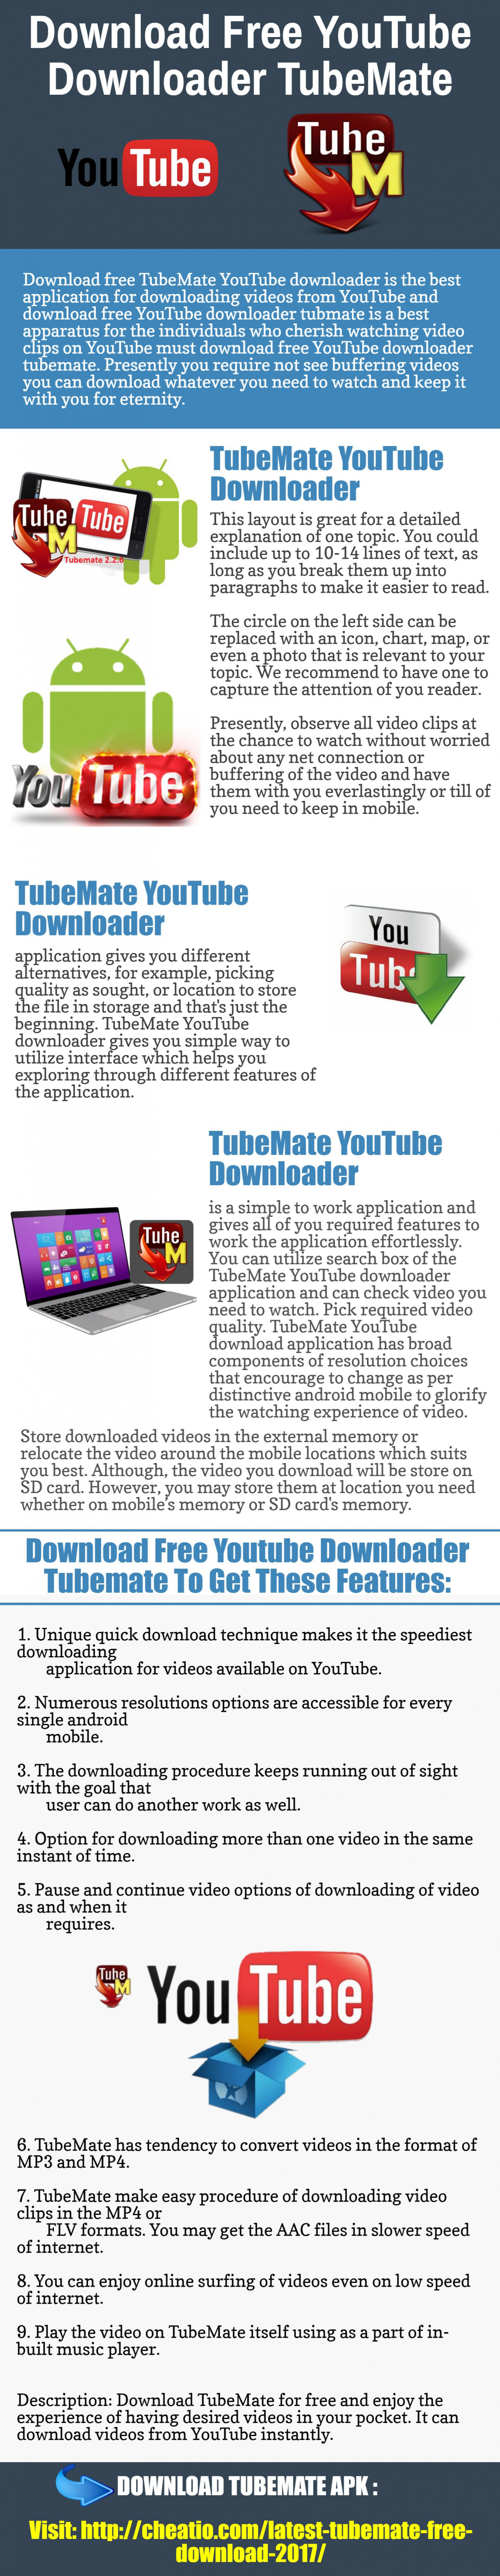 Download free YouTube downloader TubeMate Infographic